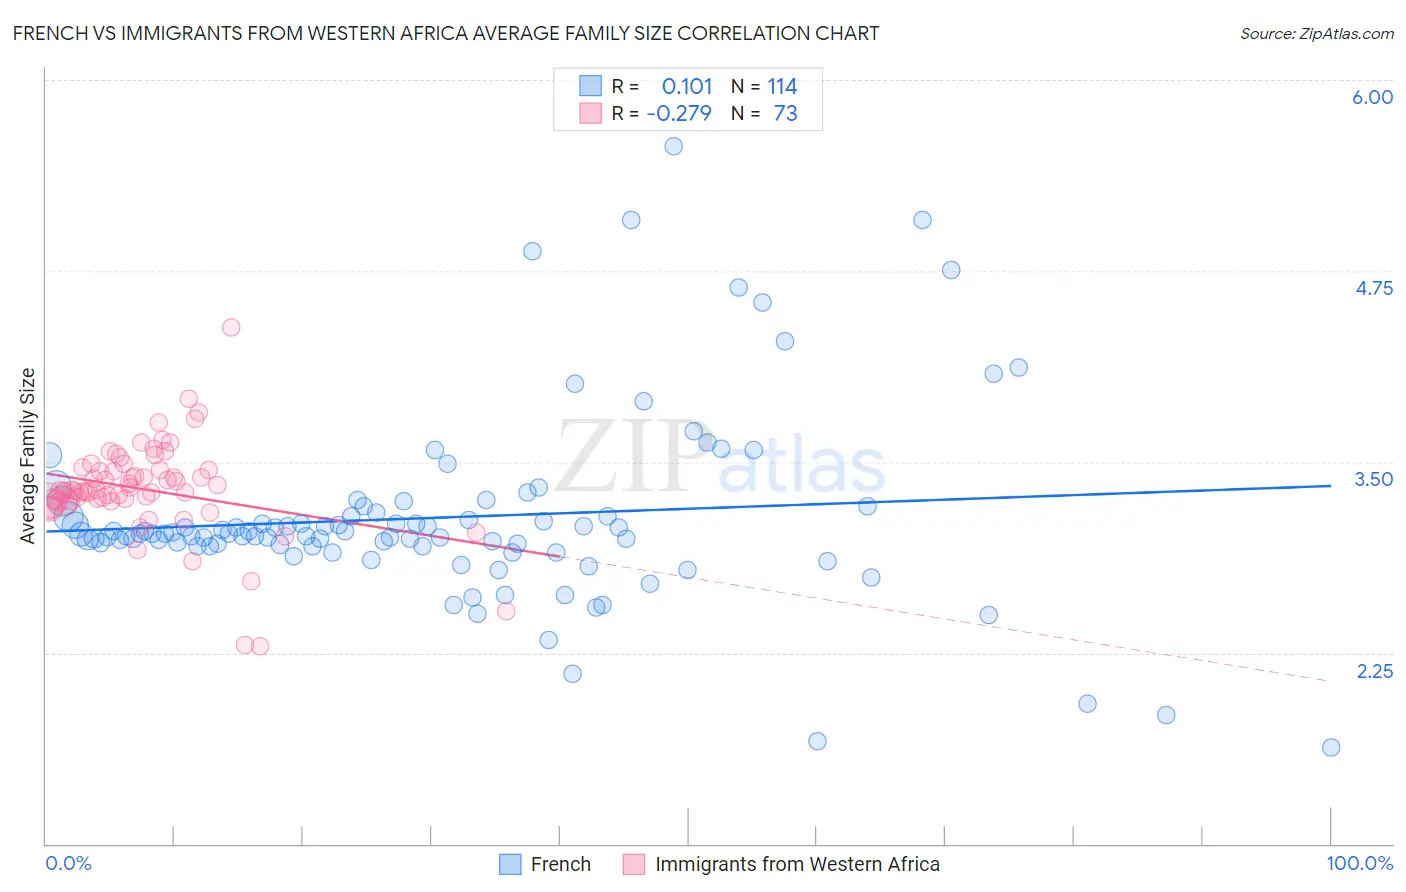 French vs Immigrants from Western Africa Average Family Size